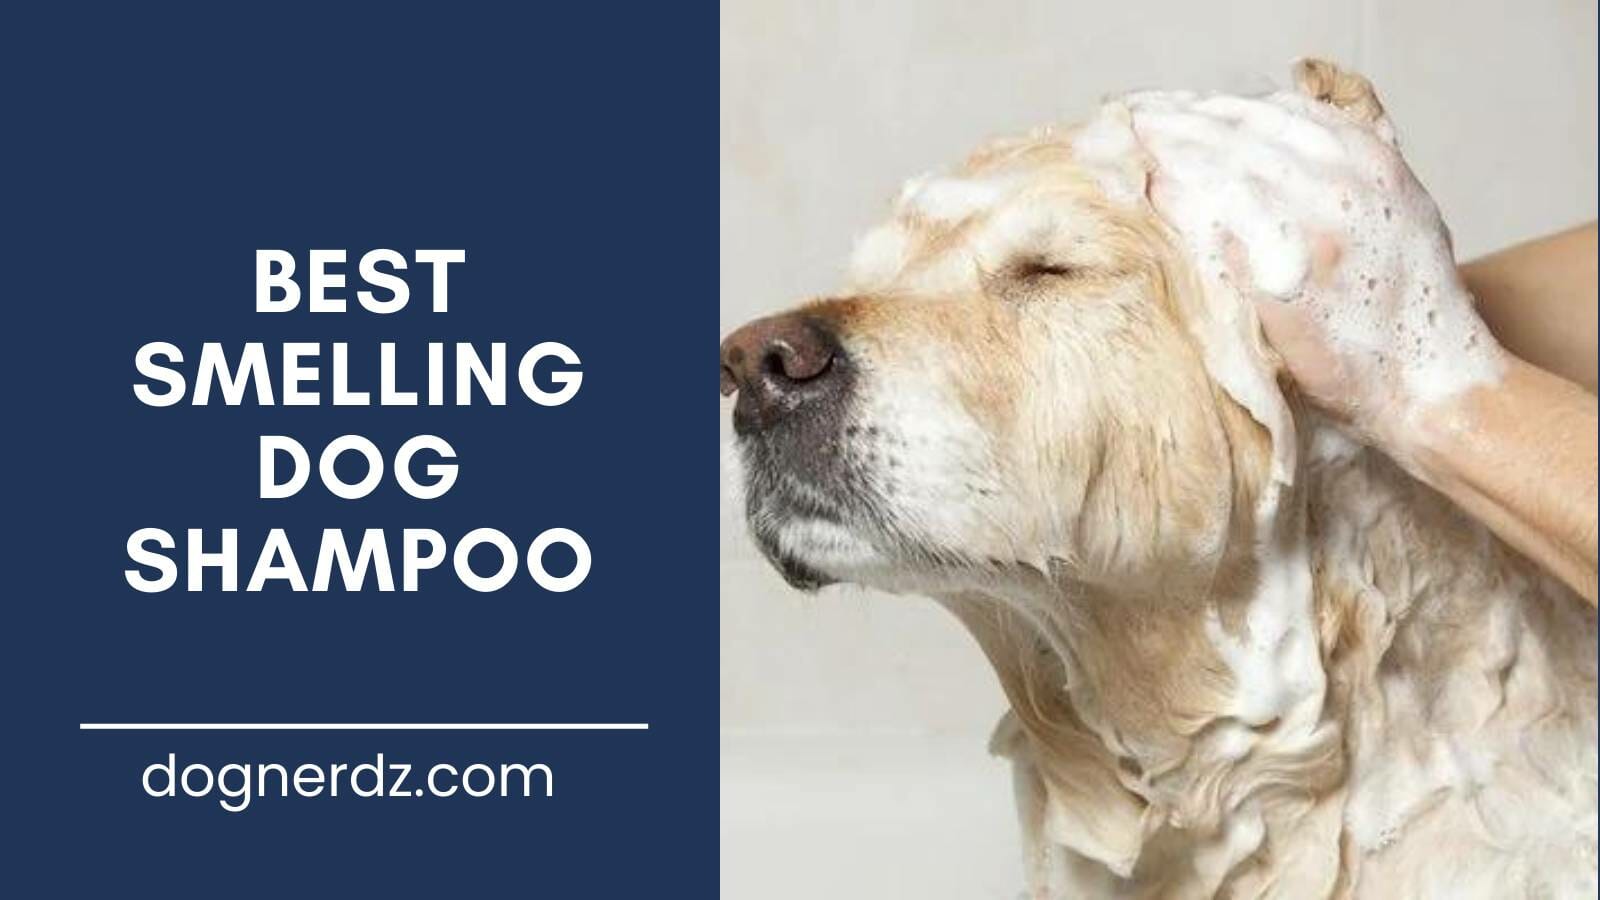 review of the best smelling dog shampoo